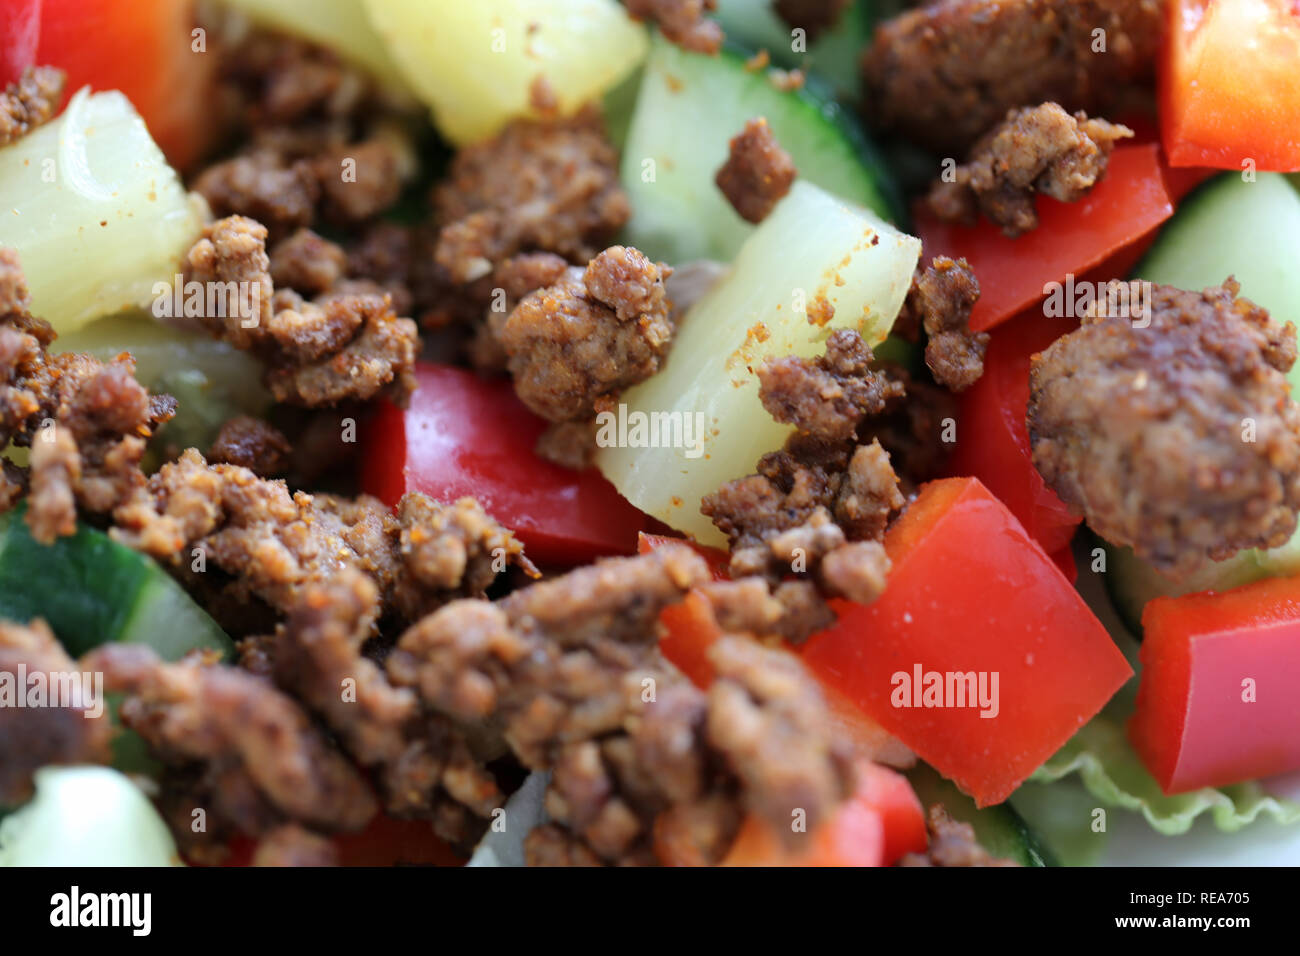 Macro photo of a delicious homemade salad. This healthy salad includes some minced meat, salad, nuts, pineapples, red peppers and more. Yum! Stock Photo